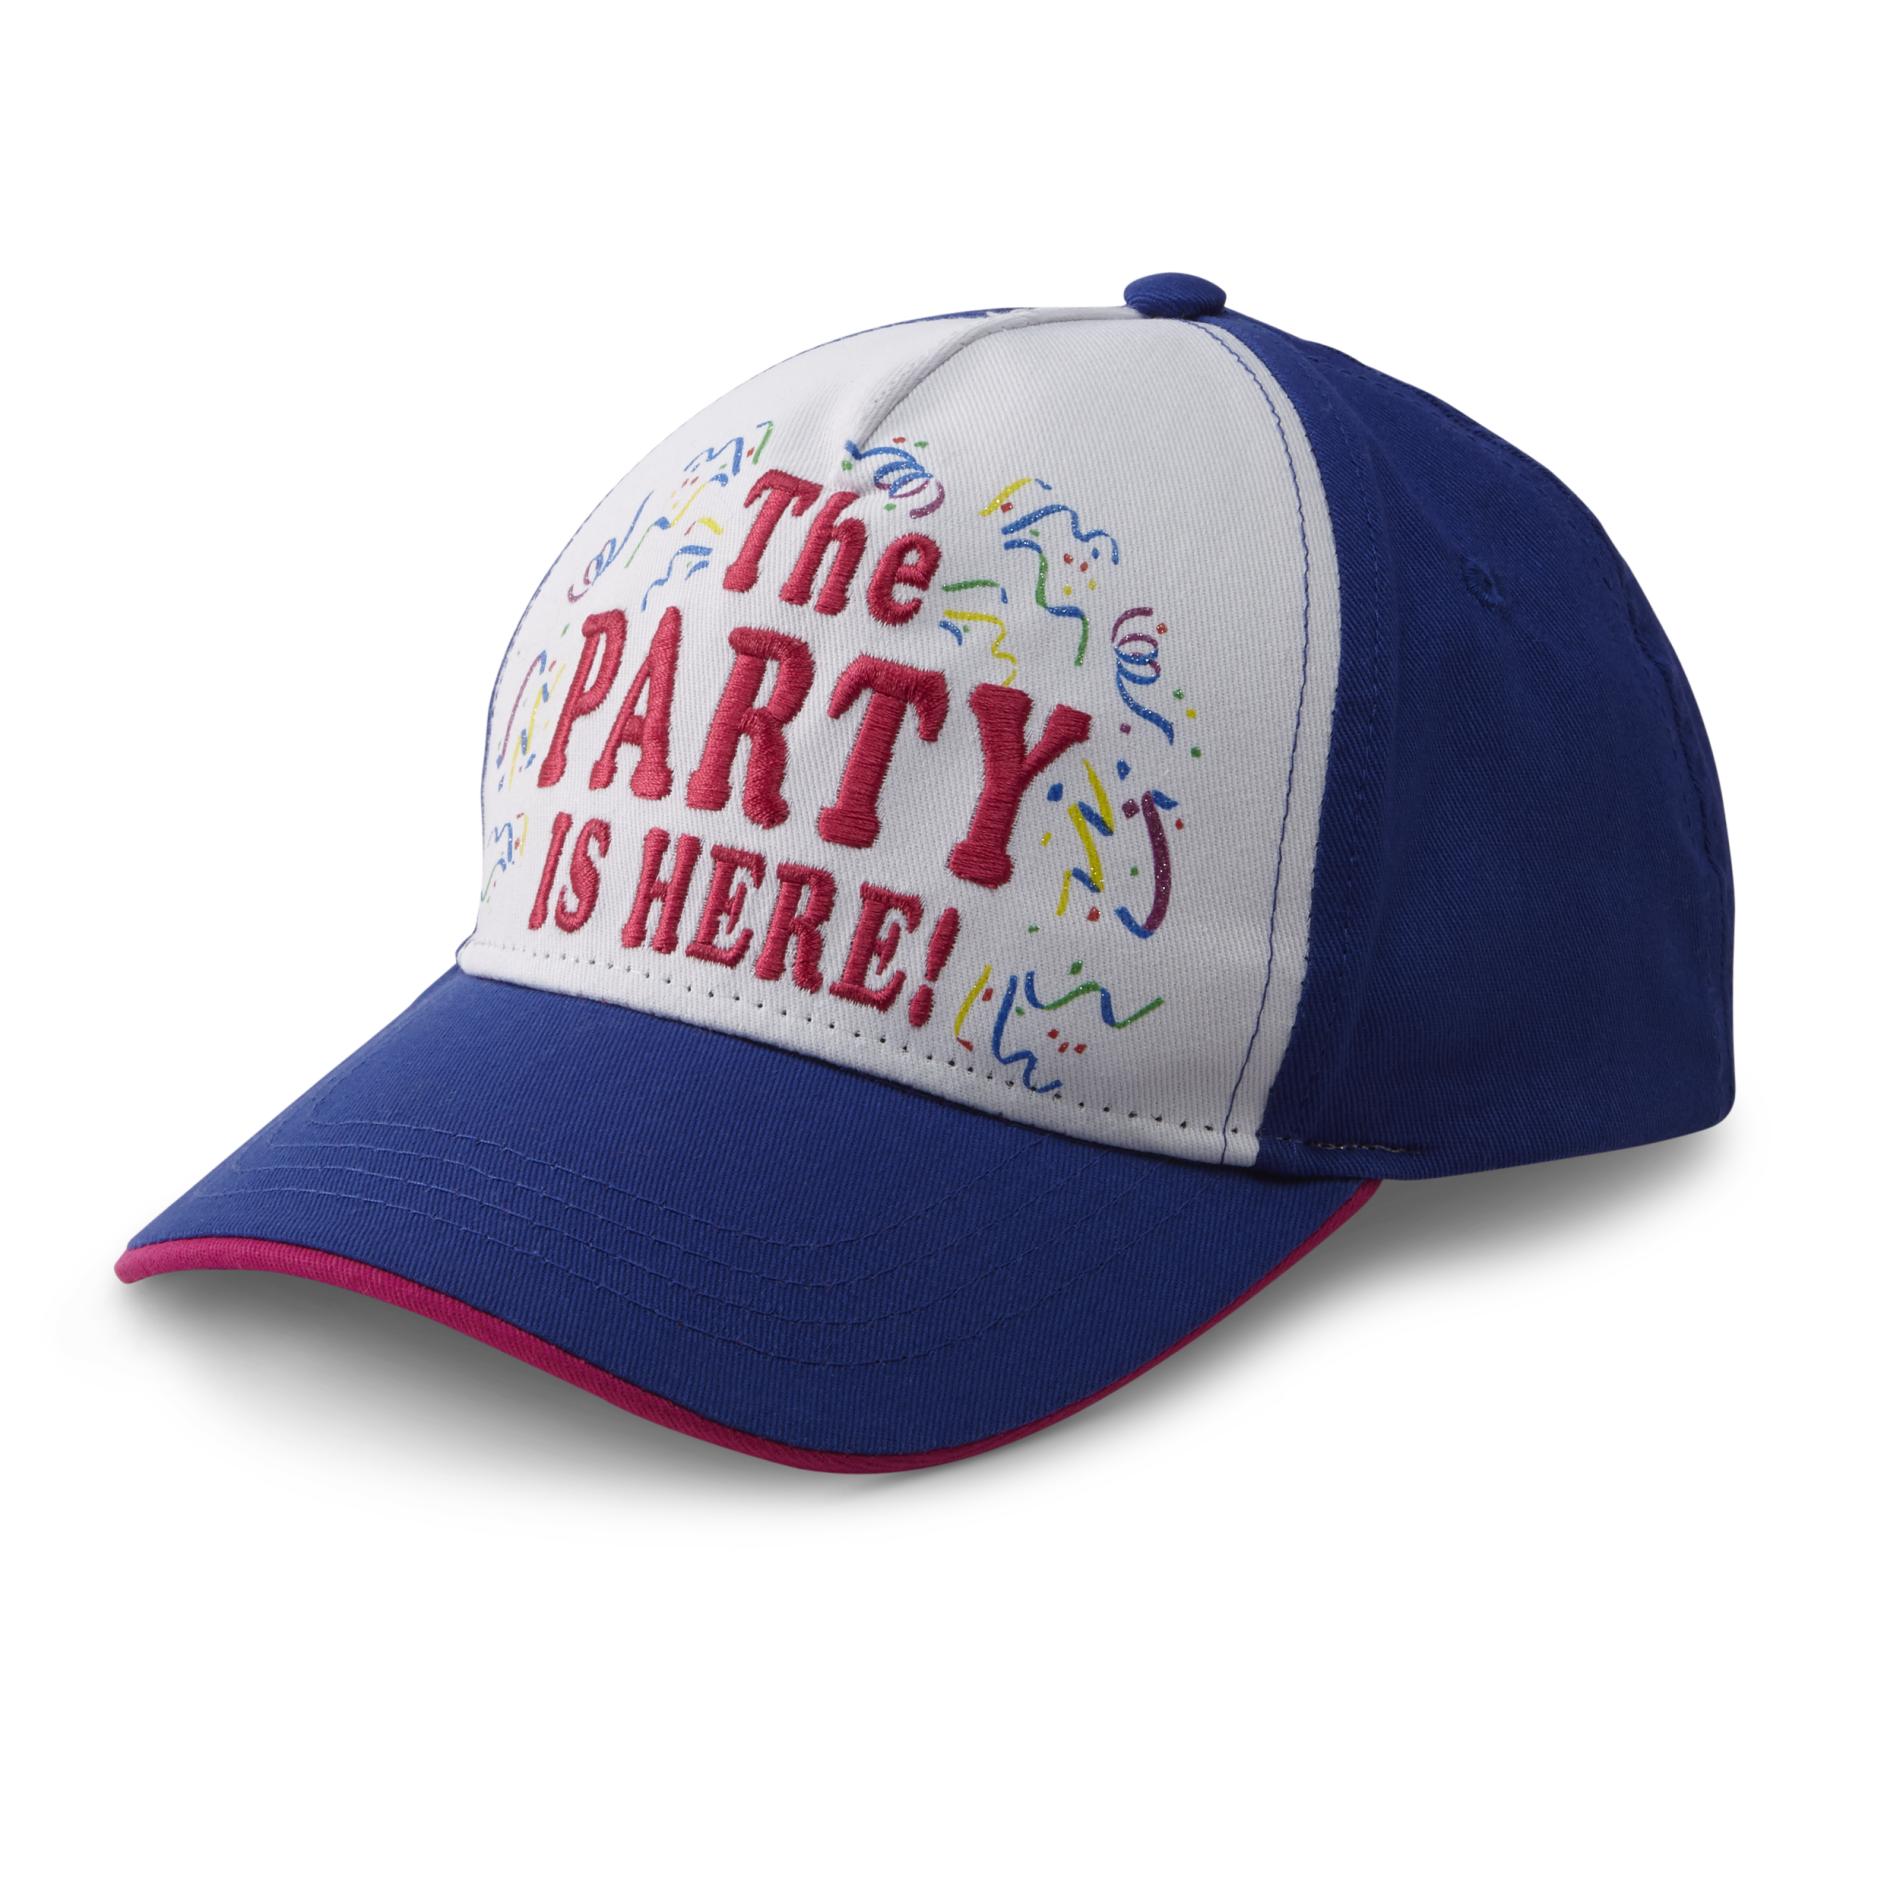 Girls' Embroidered Baseball Hat - Party